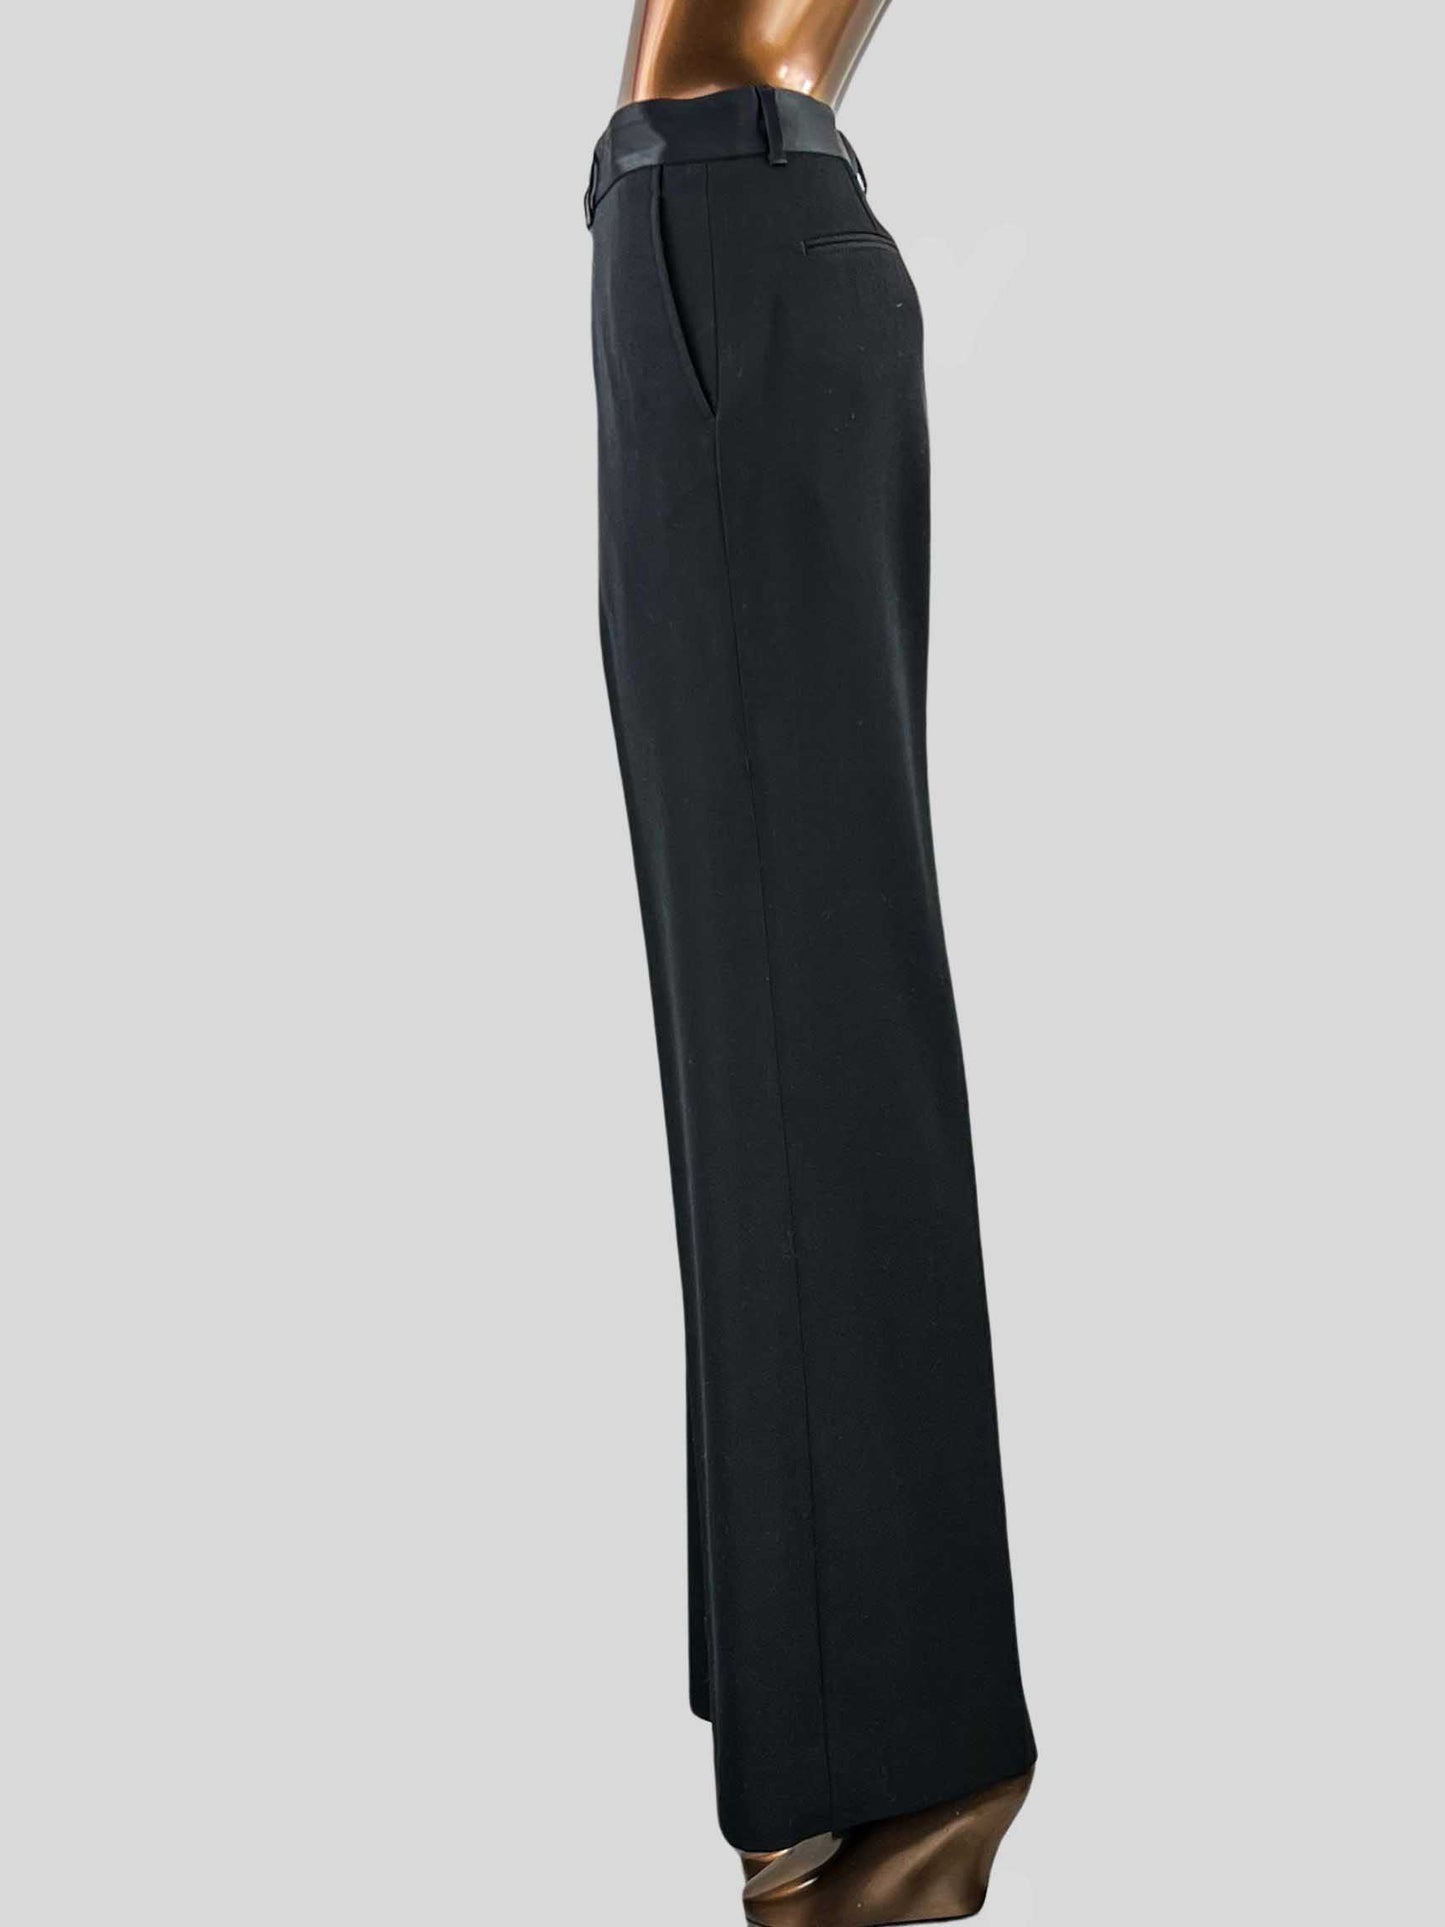 PAUL SMITH Parallel Leg Tuxedo Wool Trousers With Satin Details - 44 IT | 8 US